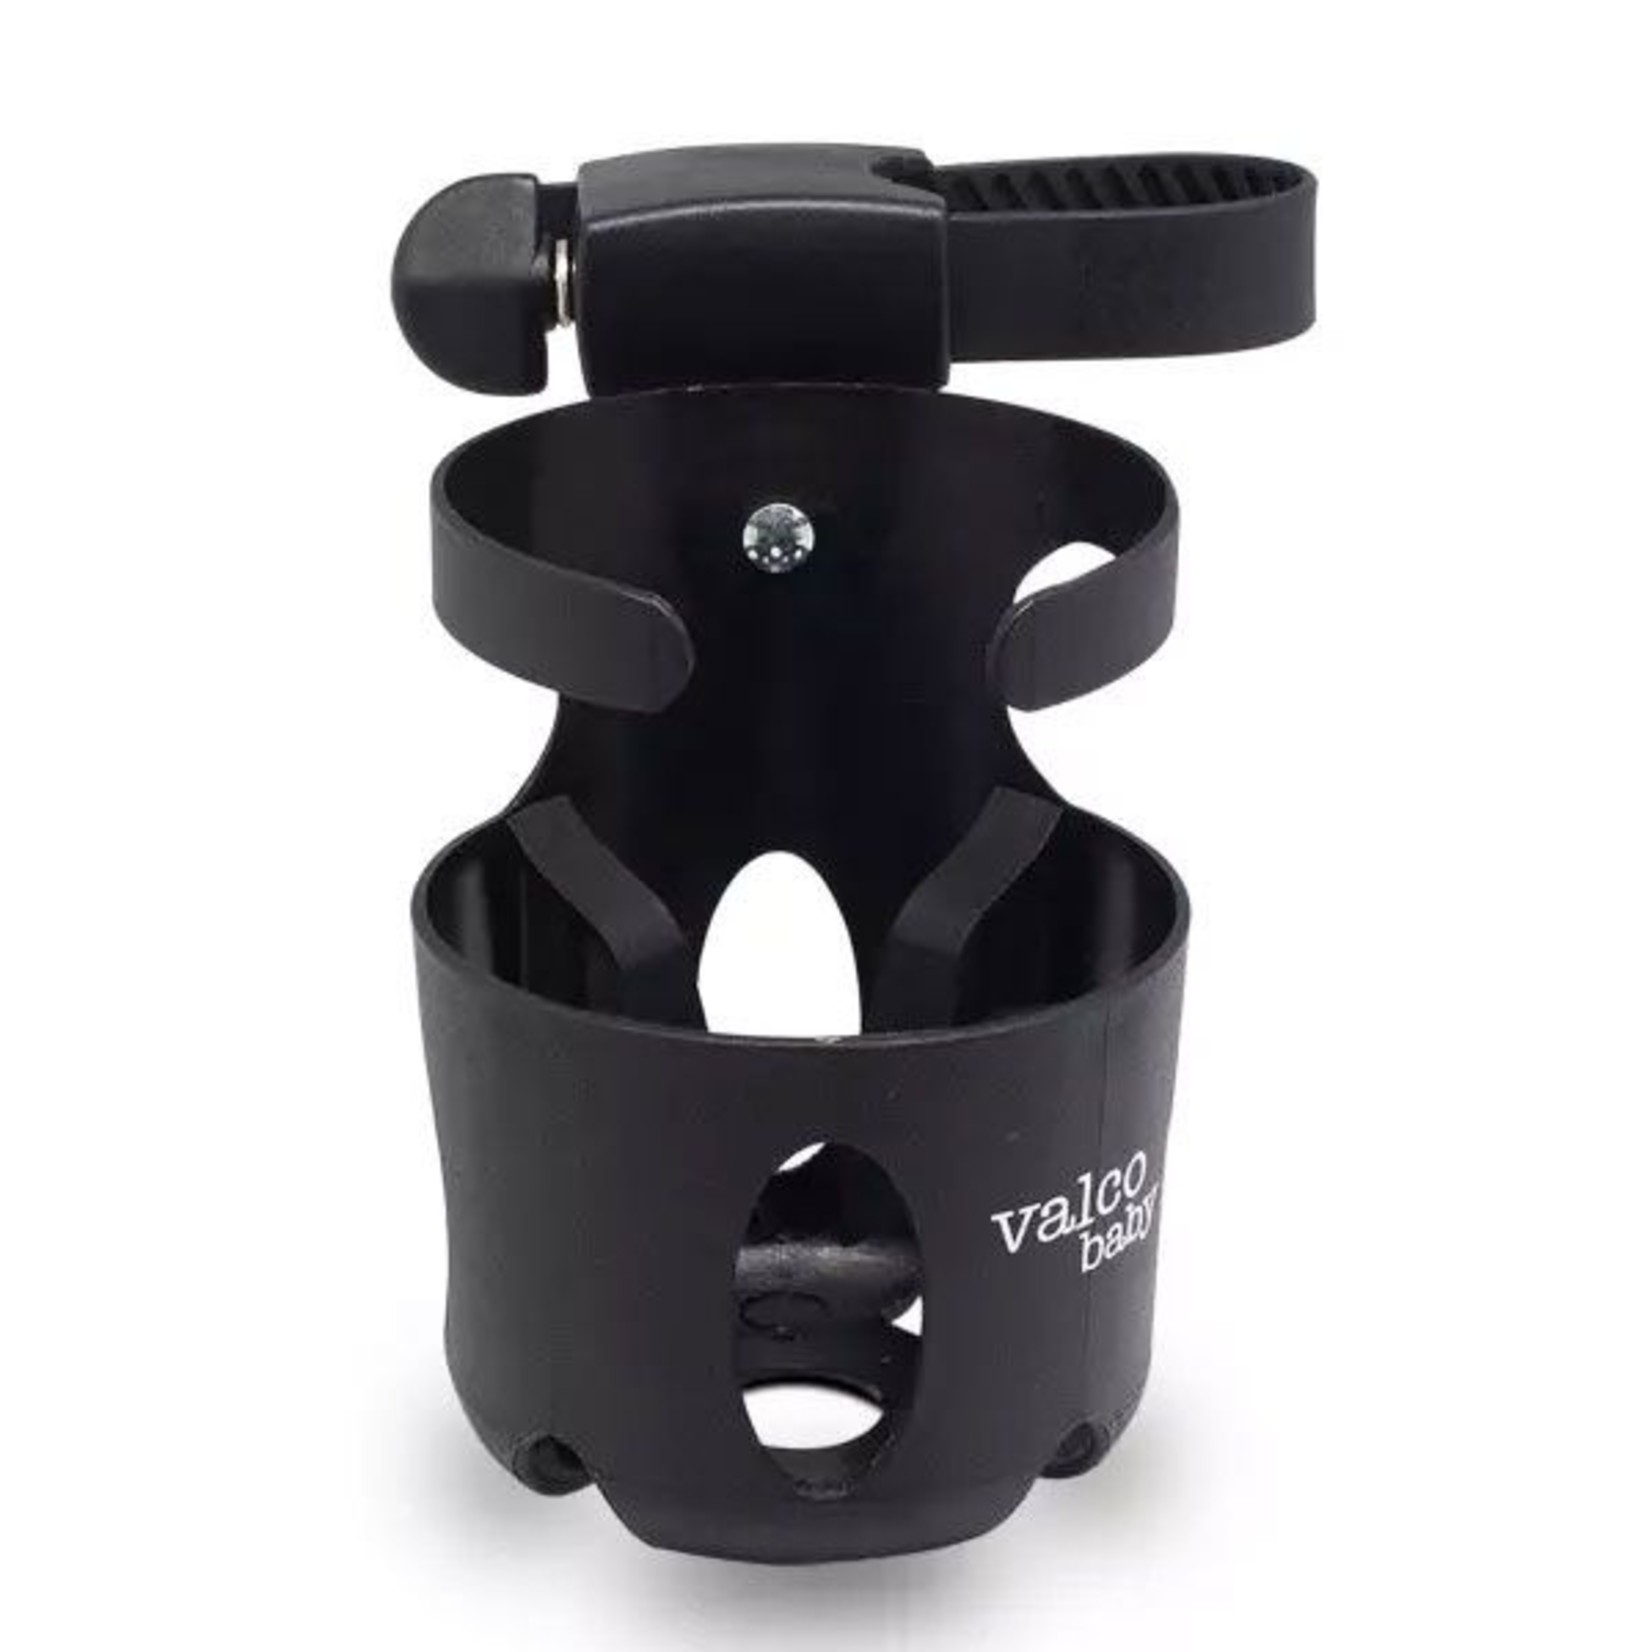 Valco Baby Universal Cup holder -black (ACC5951)